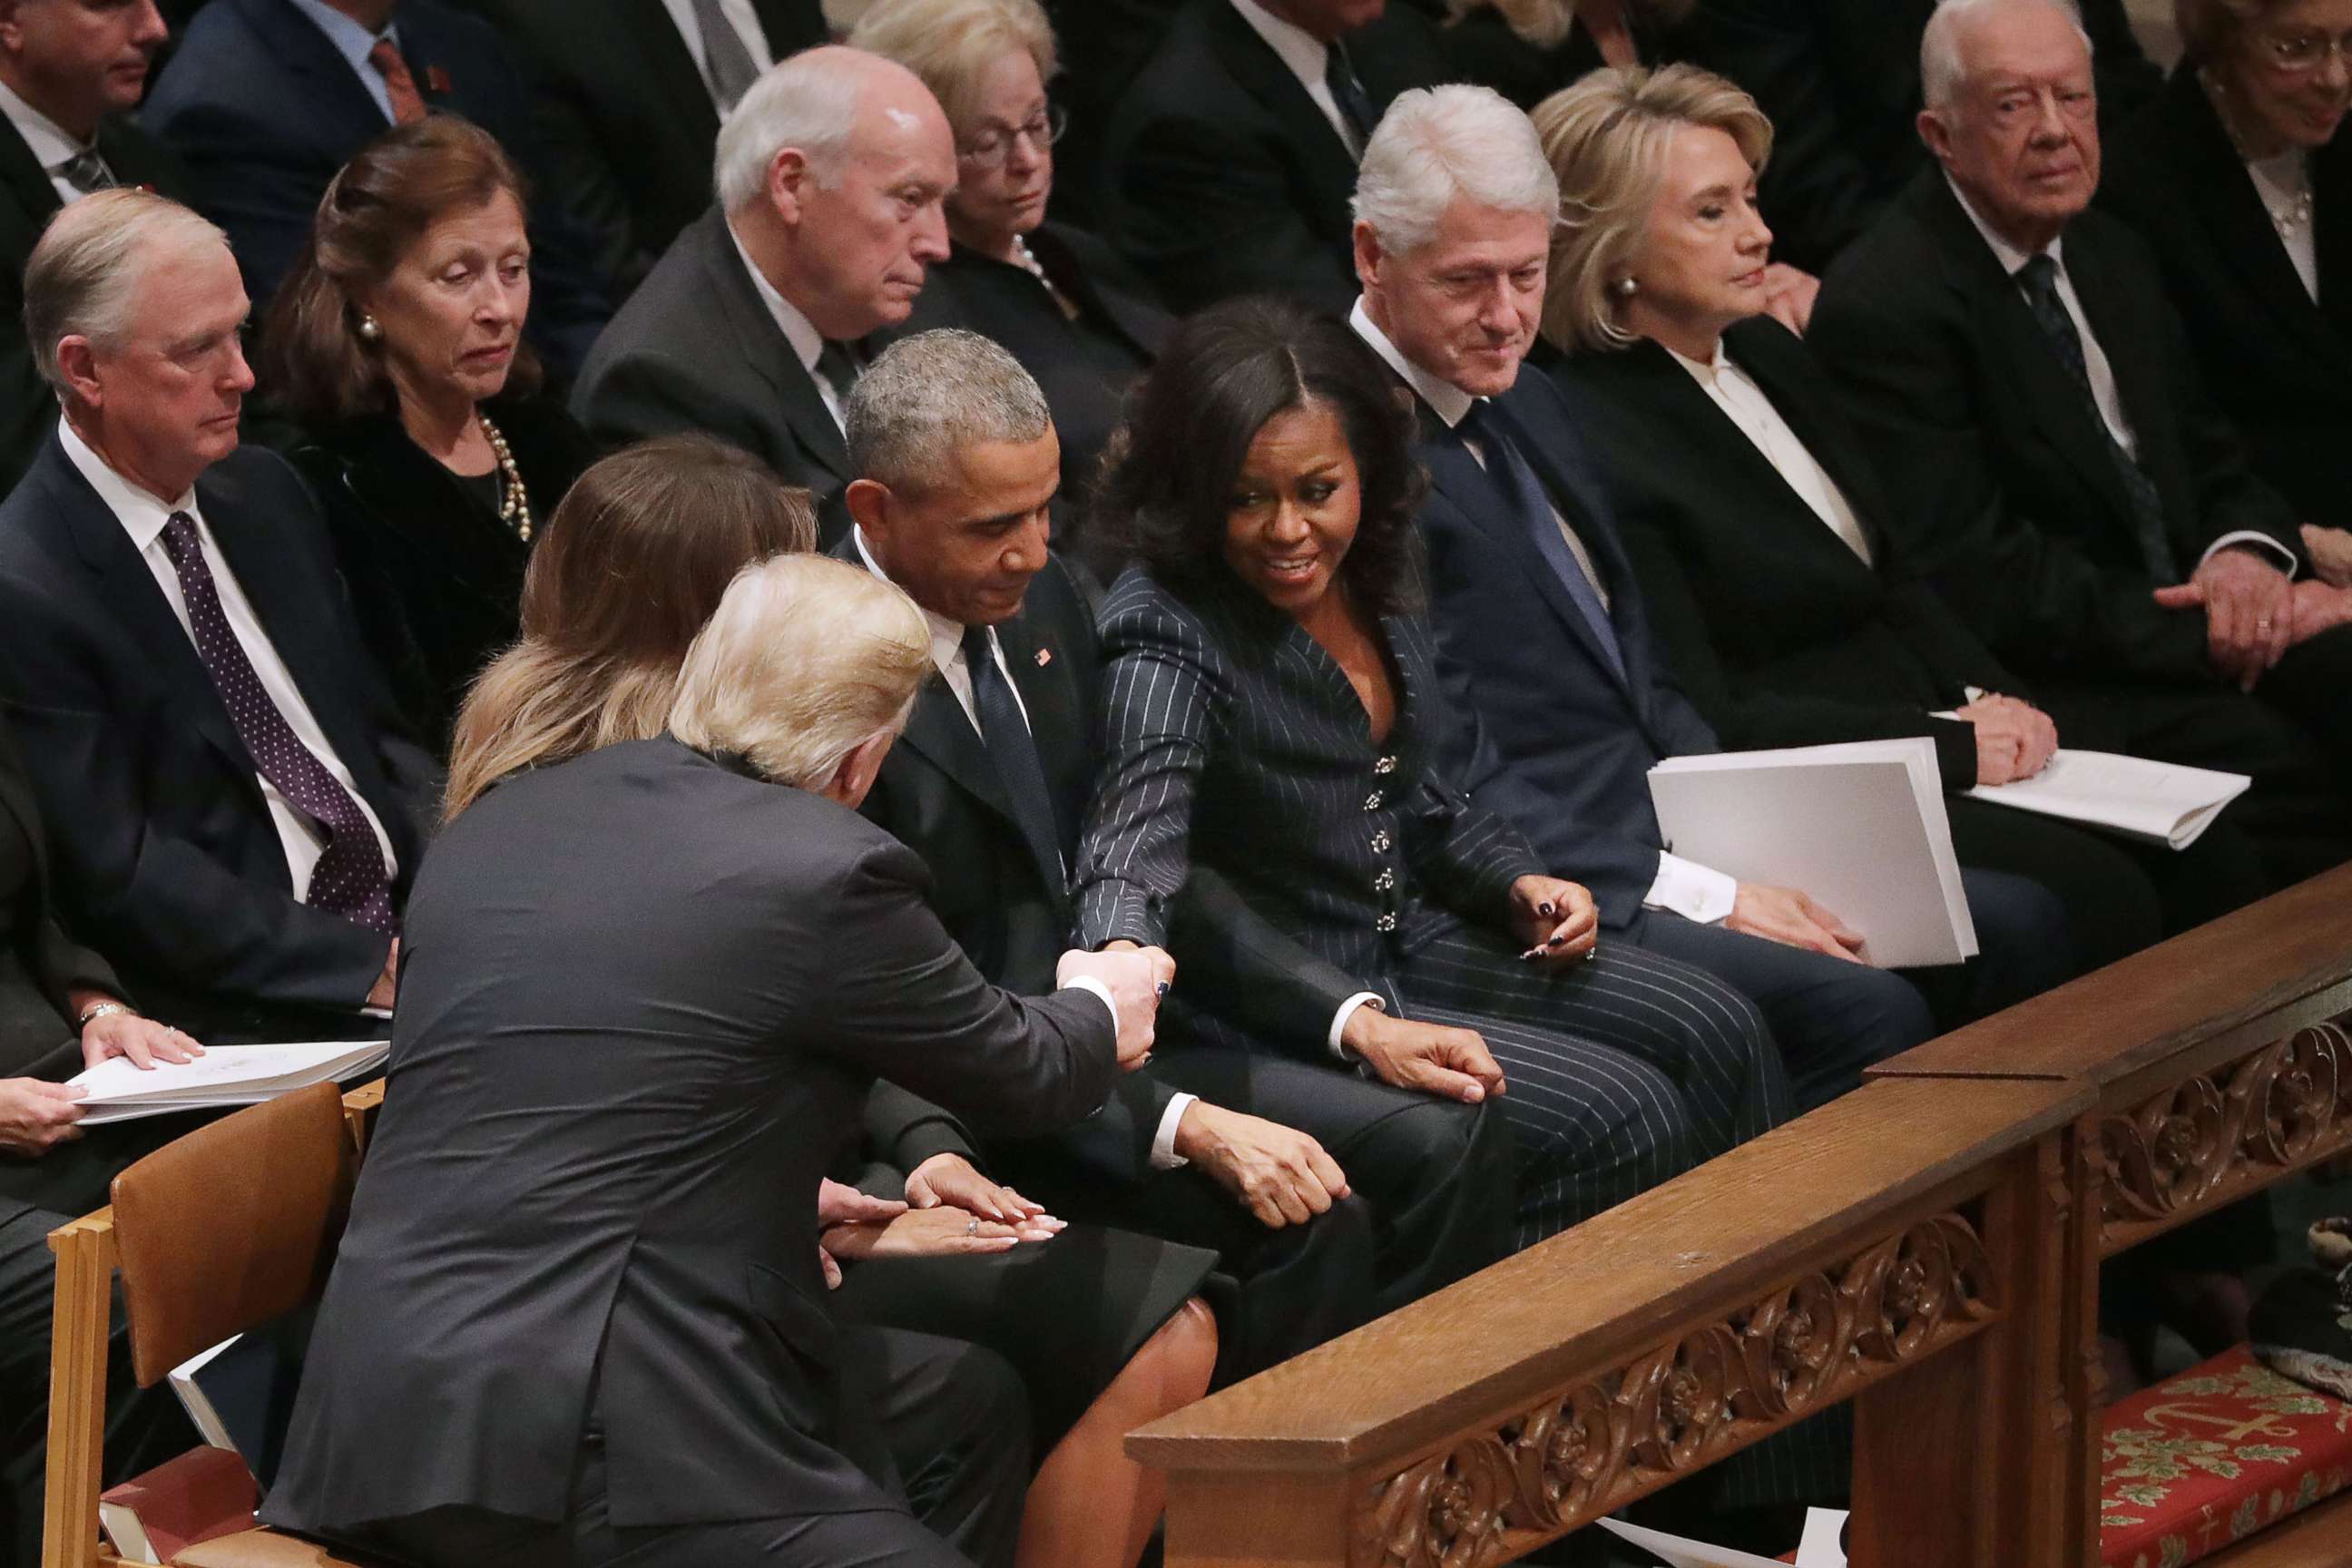 PHOTO: President Donald Trump and first lady Melania Trump greet former President Barack Obama and Michelle Obama, joining other former presidents and their spouses for the state funeral for former President George H.W. Bush, Dec. 5, 2018 in Washington.